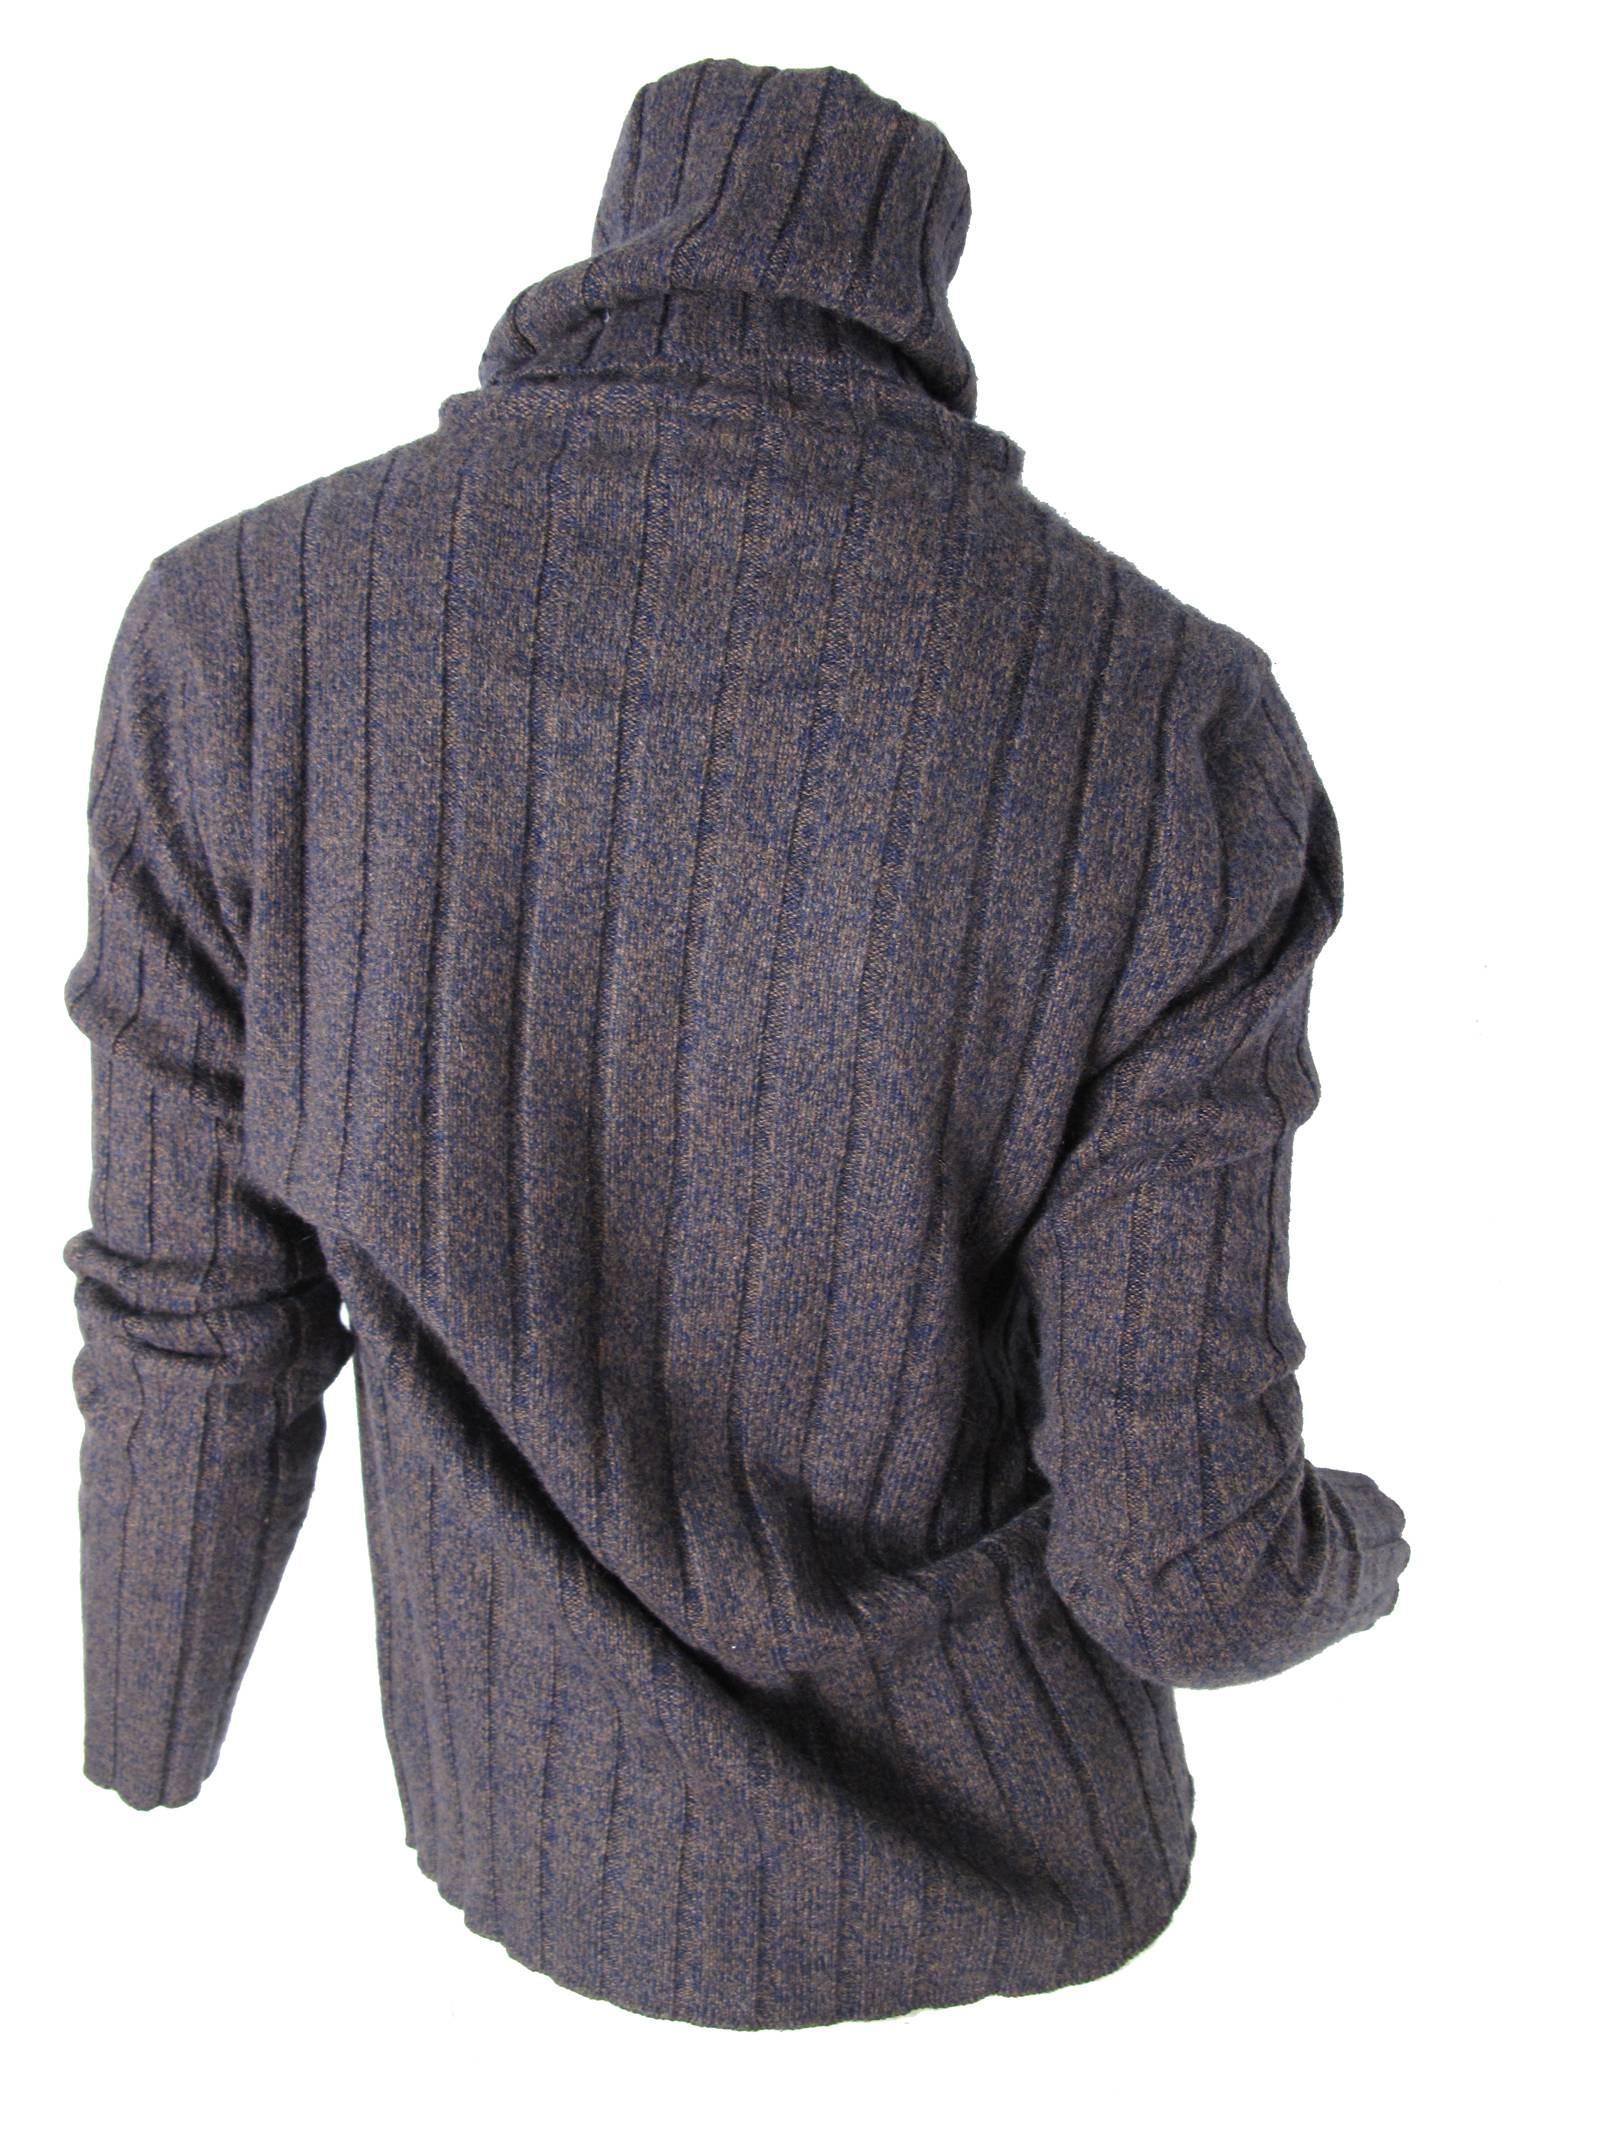 Chanel Brown and blue ribbed funnel neck sweater. Condition: Excellent. Size 40. 
We accept returns for refund, please see our terms.  We offer free ground shipping within the US.  Please let us know if you have any questions. 